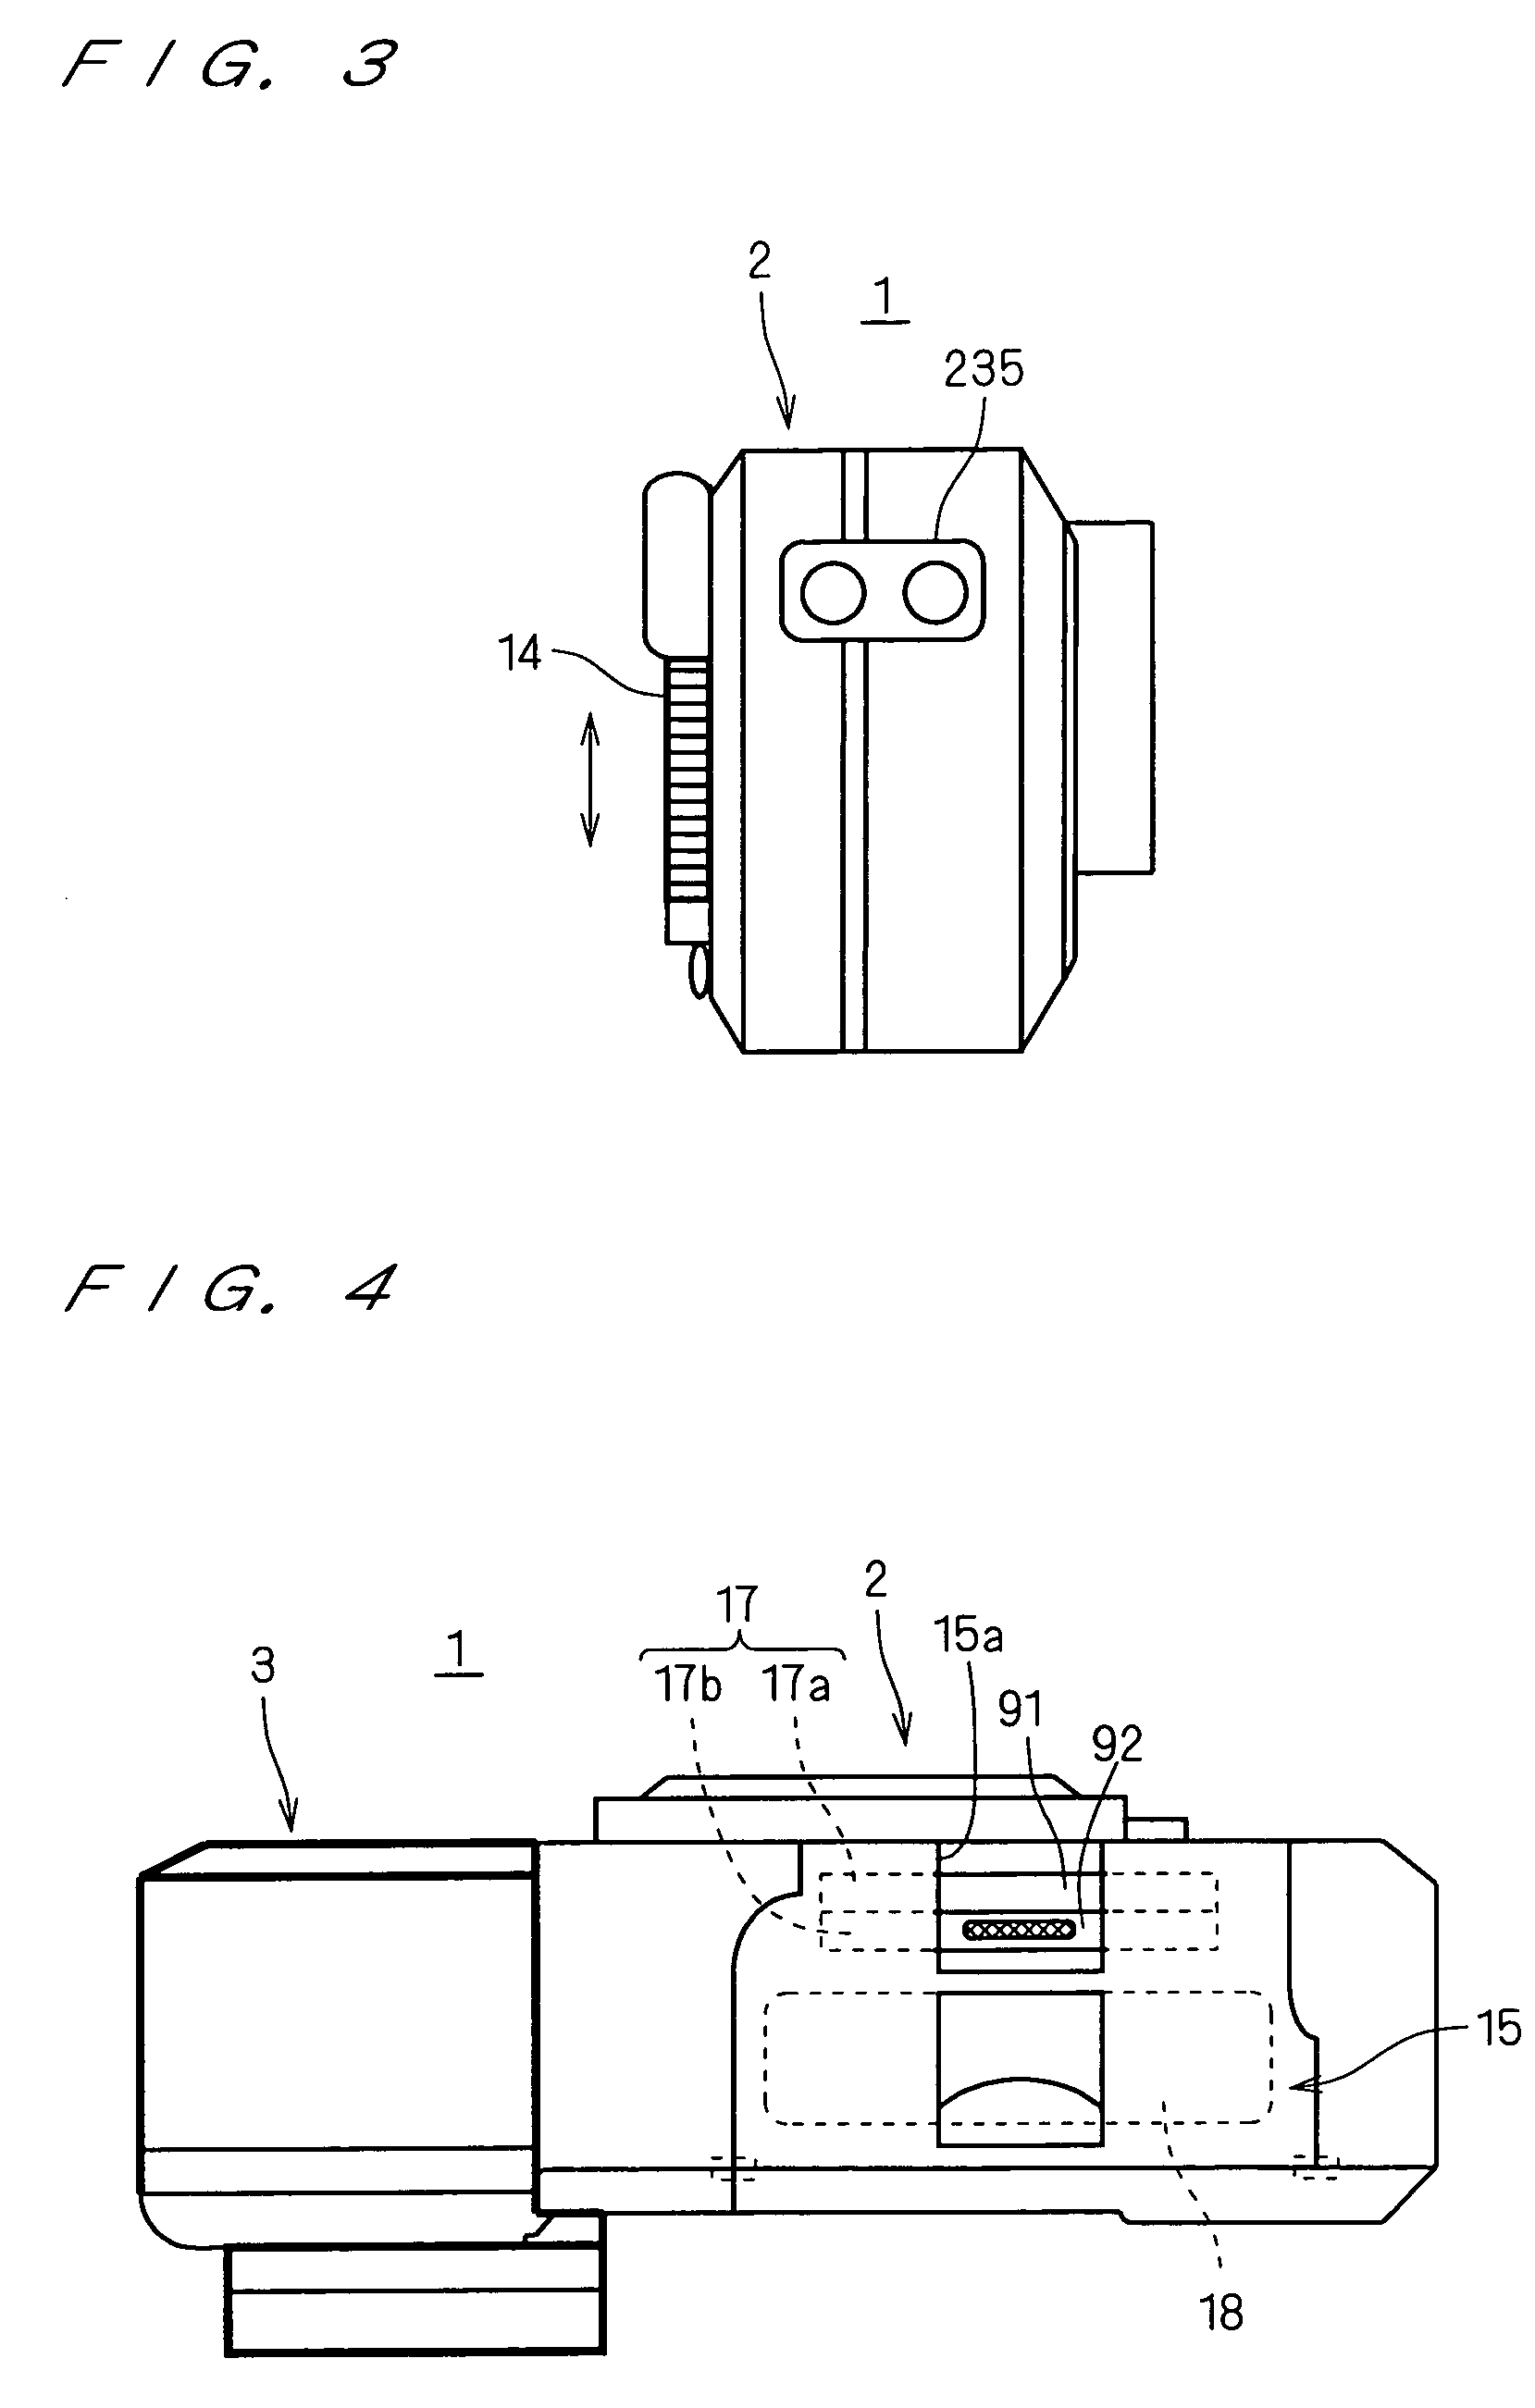 Method and apparatus for diagnosing electronic device